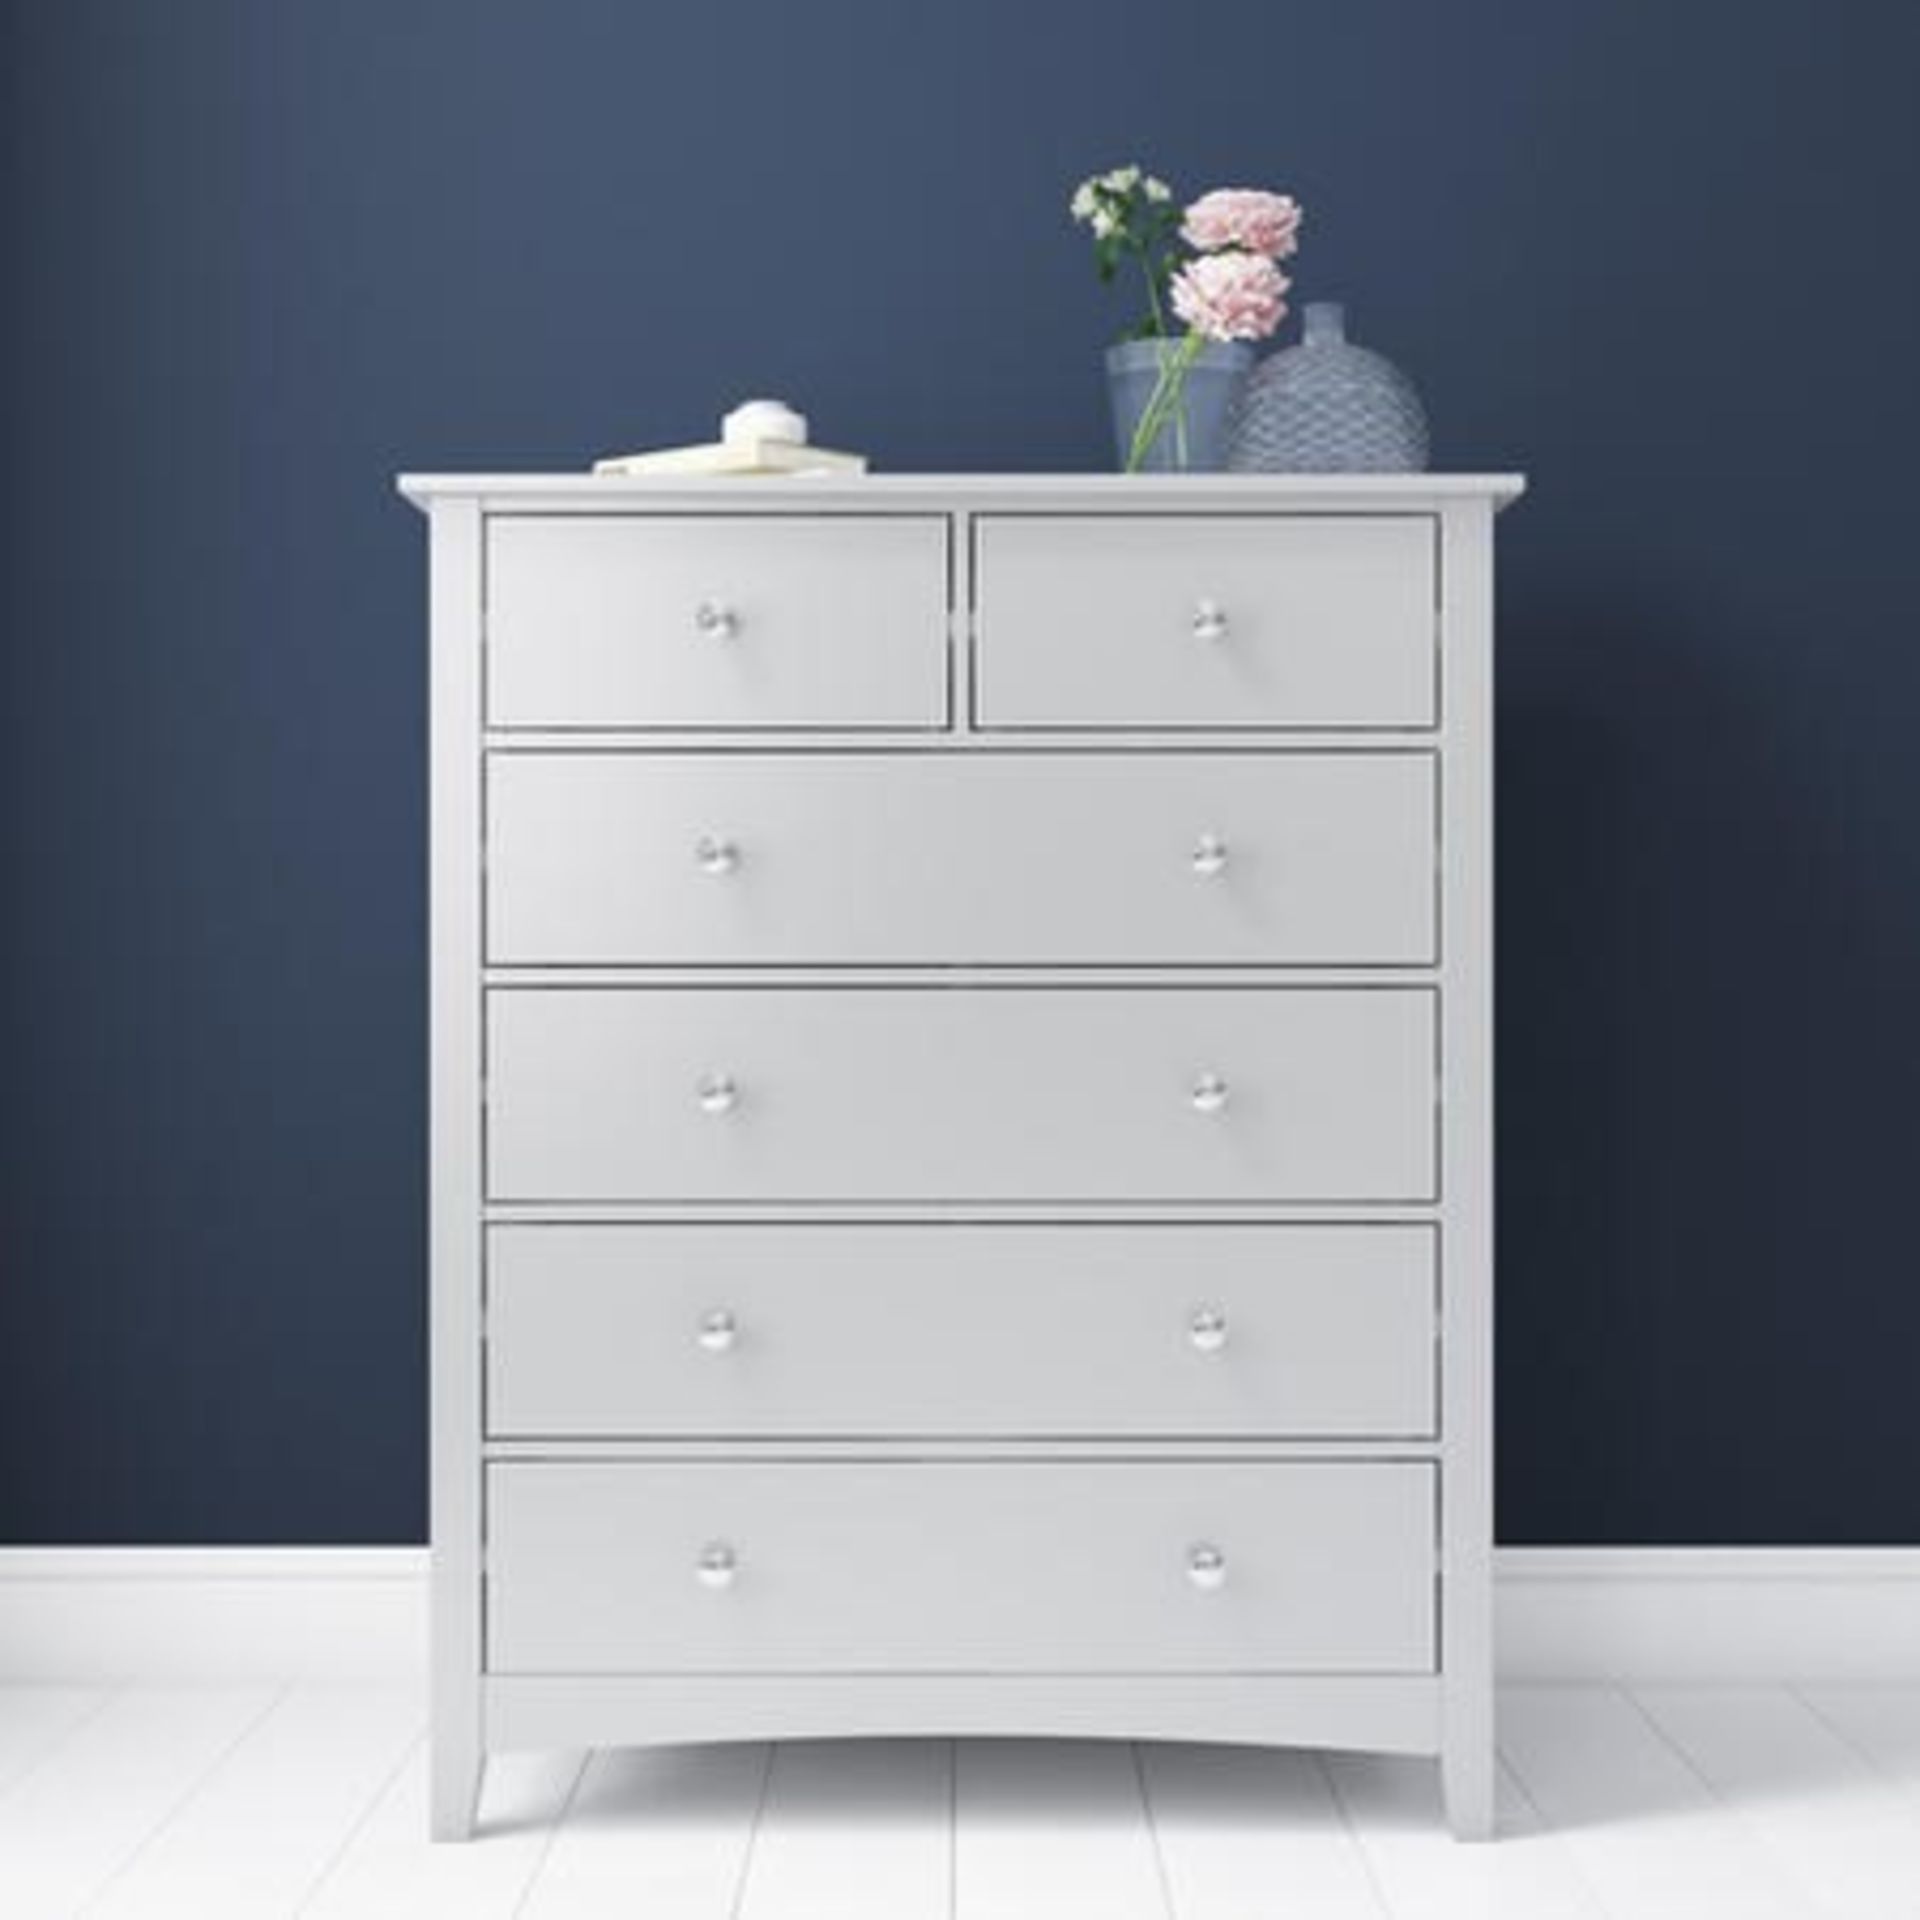 1 GRADE B BOXED FINCH 2+4 DRAWER CHEST IN LIGHT GREY / RRP £230.00 (VIEWING HIGHLY RECOMMENDED)